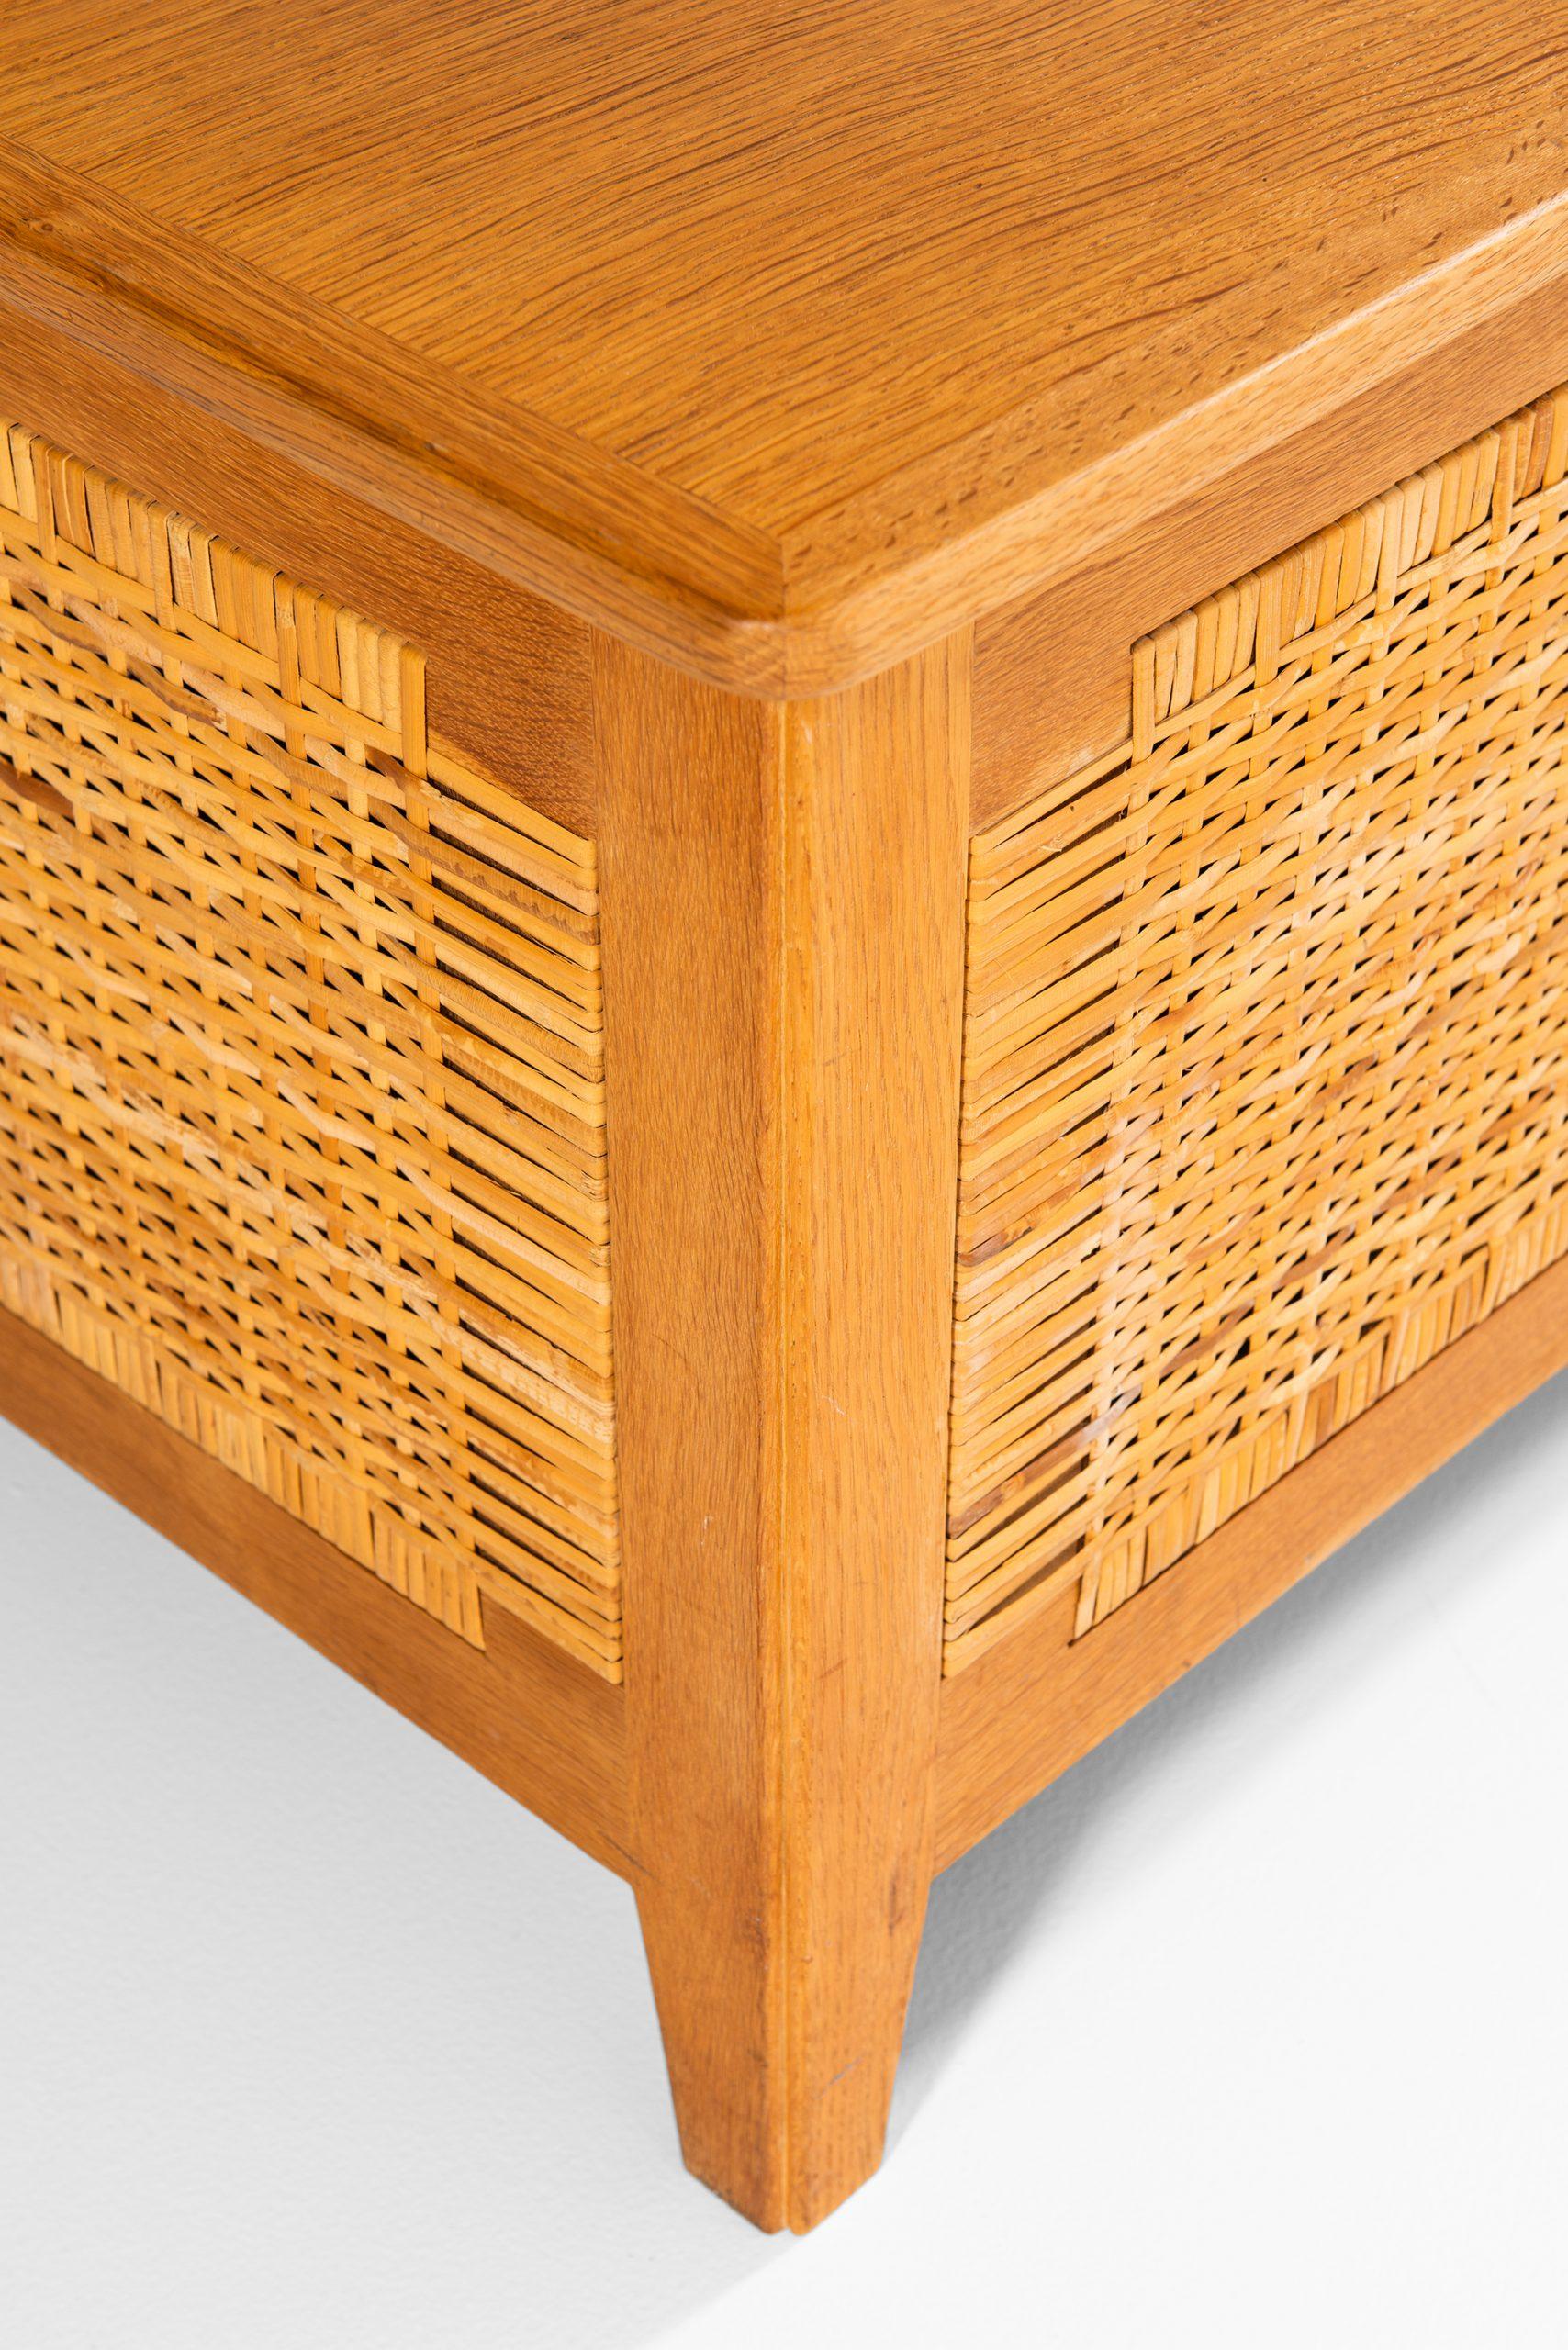 Mid-20th Century Kai Winding Chest / Bench Produced by Poul Hundevad in Denmark For Sale